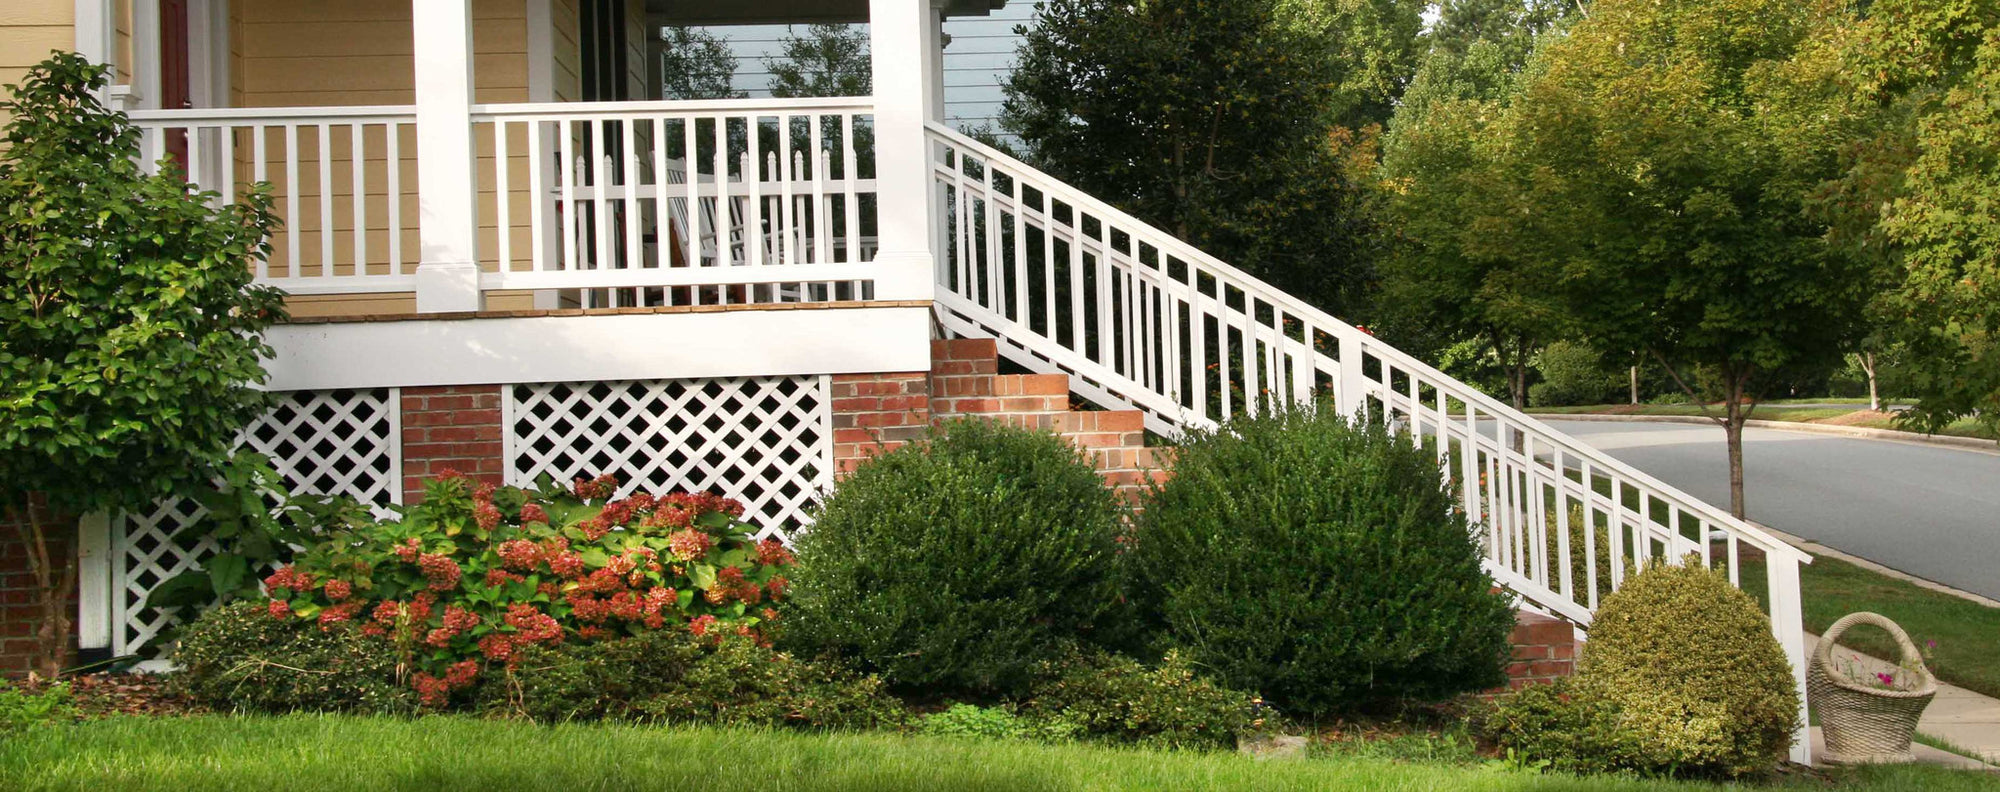 Adding Exterior Handrails – It Only Takes One Step to Fall